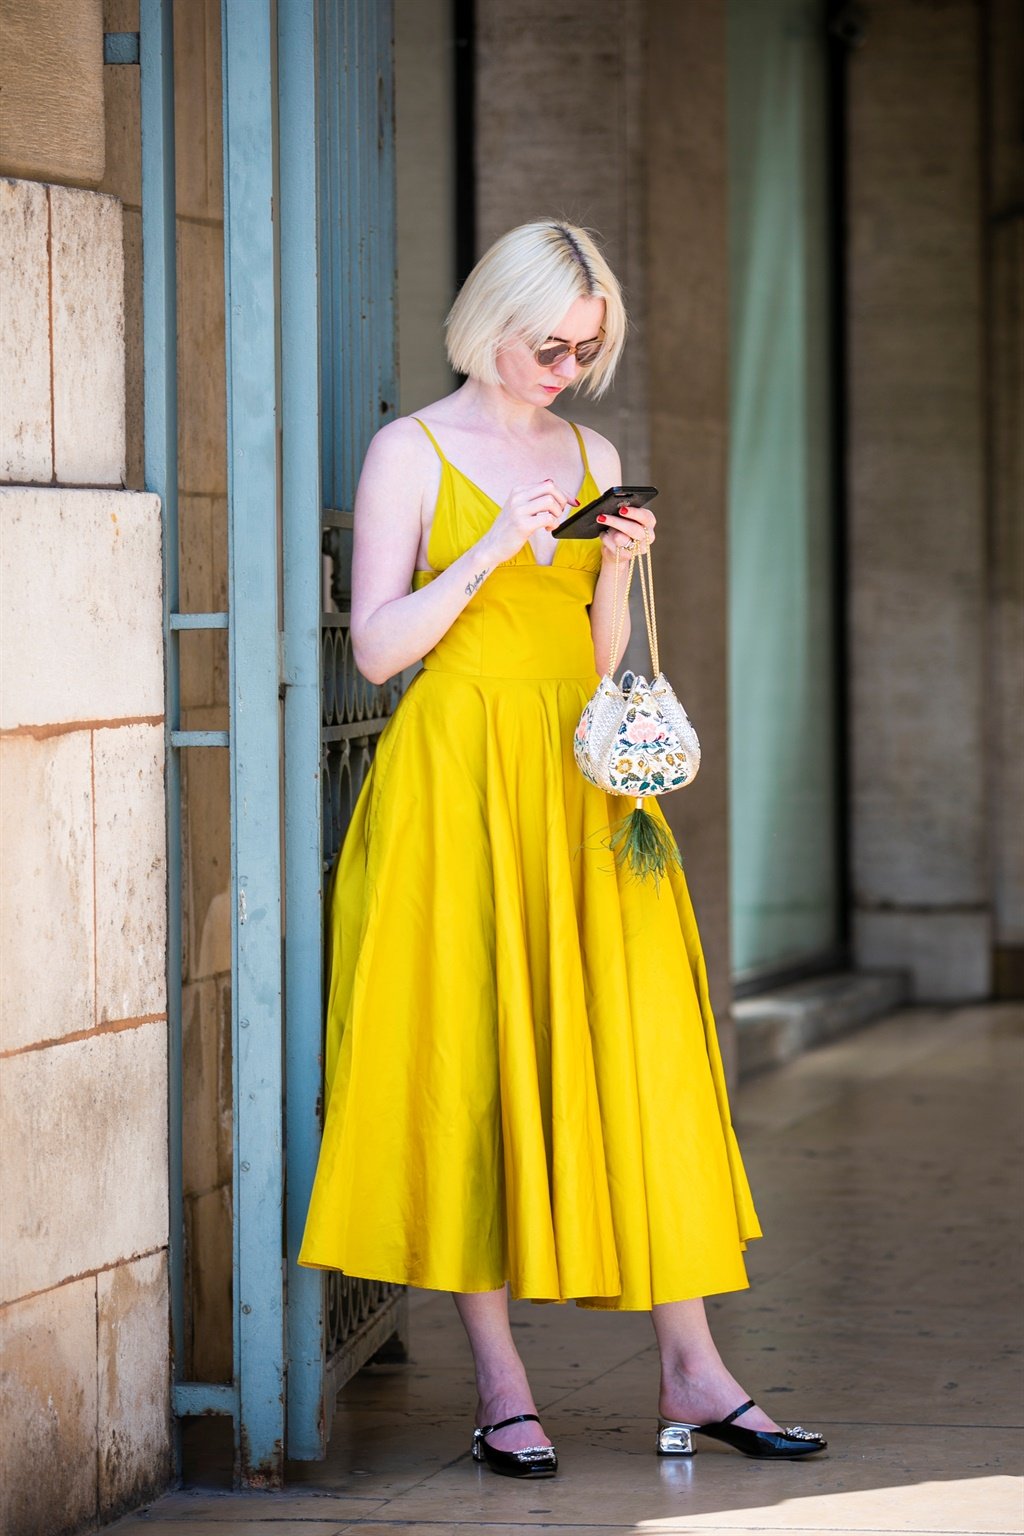 PARIS, FRANCE - JULY 01: A guest, wearing a yellow